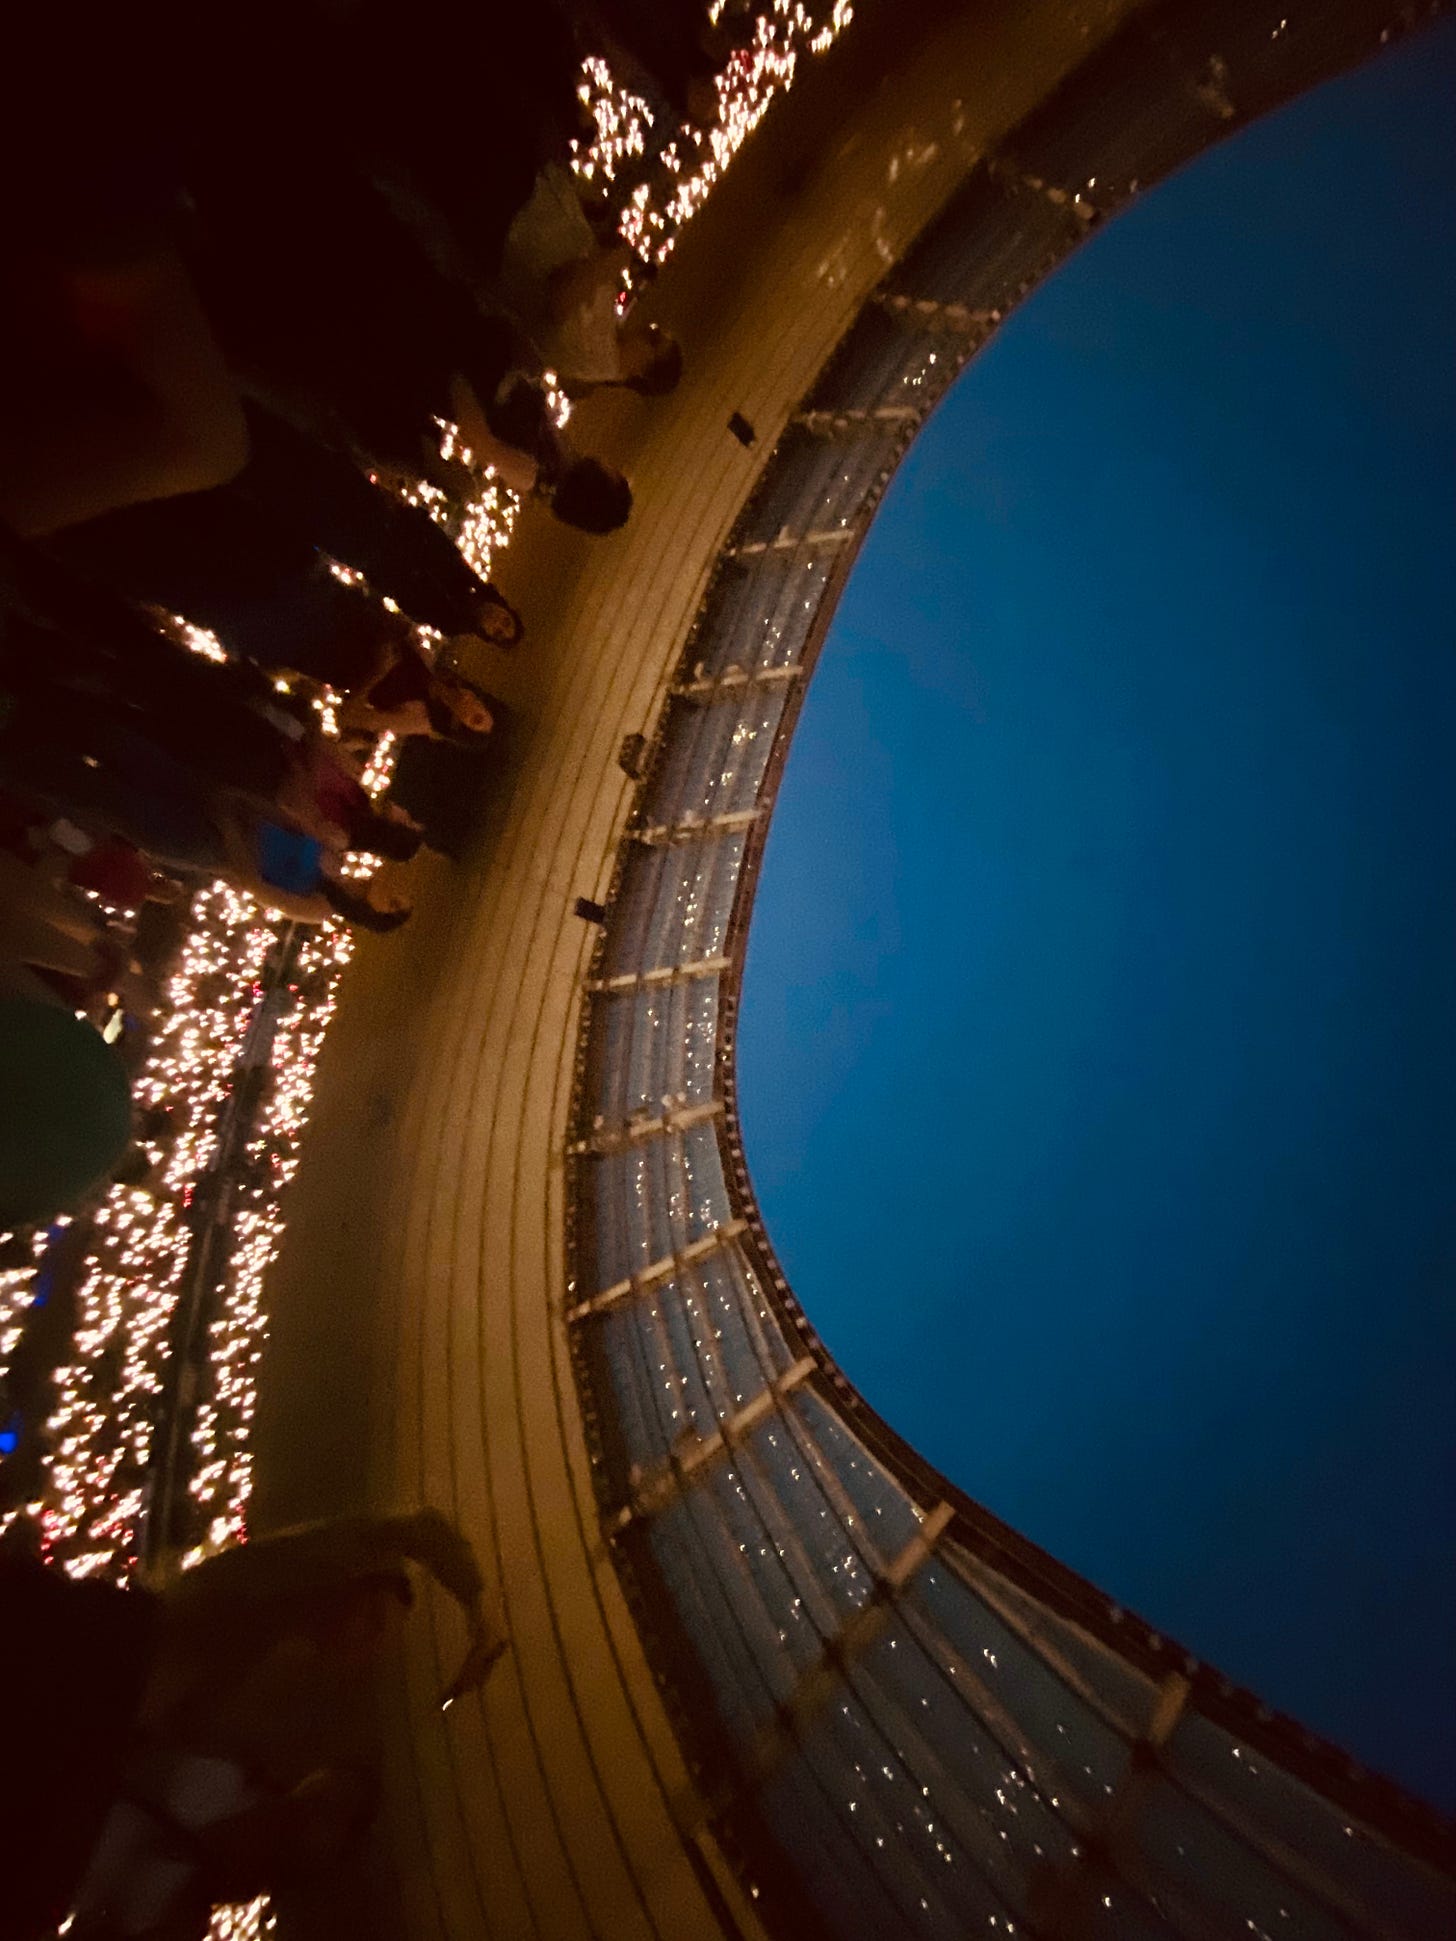 The blue night sky above the stadium and the lights from the fans' phones in the stands and reflected in the partial roof